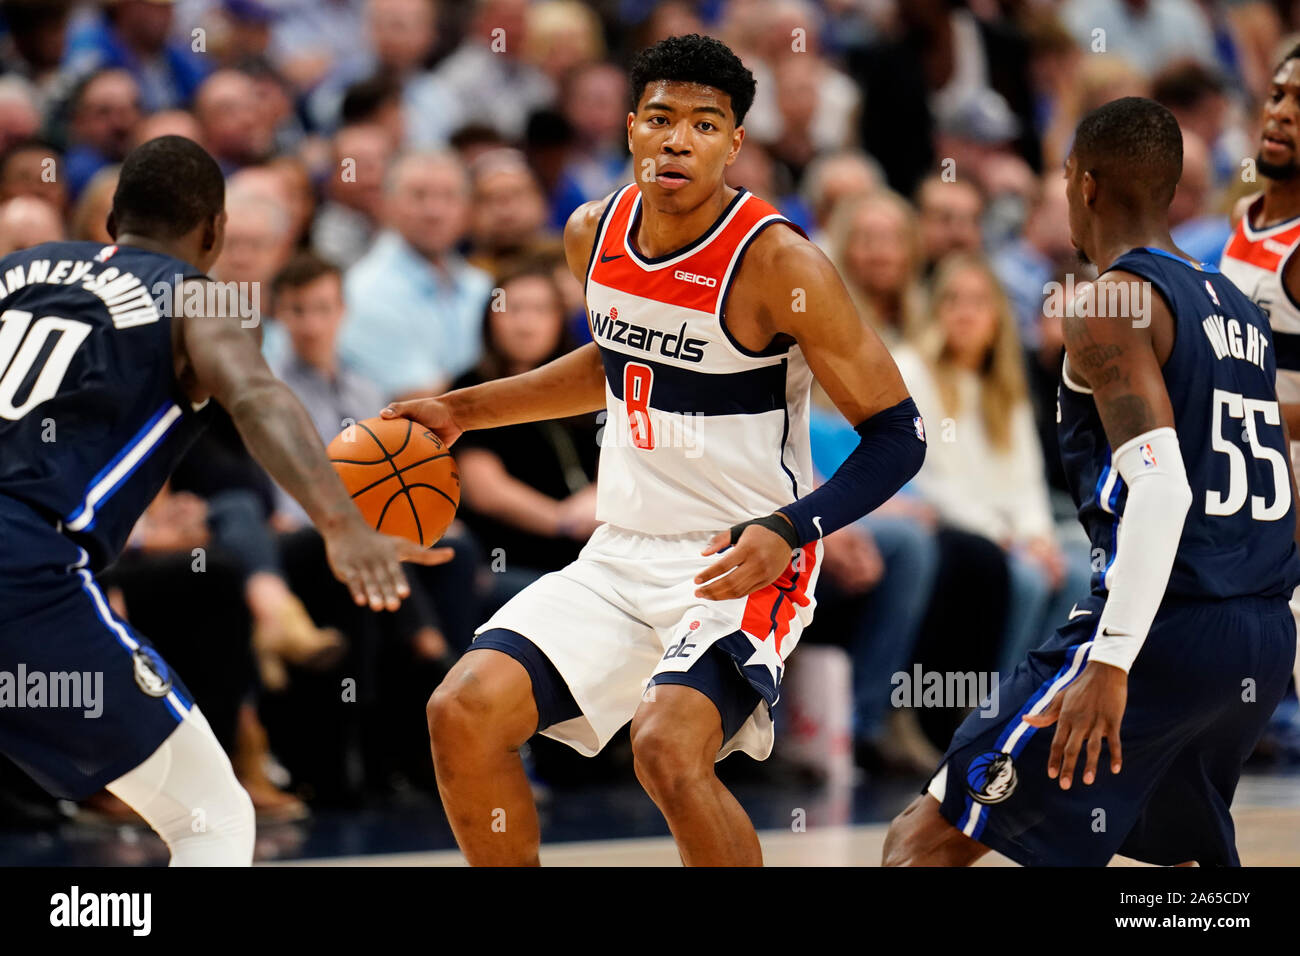 Washington Wizards' Rui Hachimura (C) during the NBA basketball game between Washington Wizards 100-108 Dallas Mavericks at American Airlines Center in Dallas, Texas, United States, October 23, 2019. Credit: AFLO/Alamy Live News Stock Photo